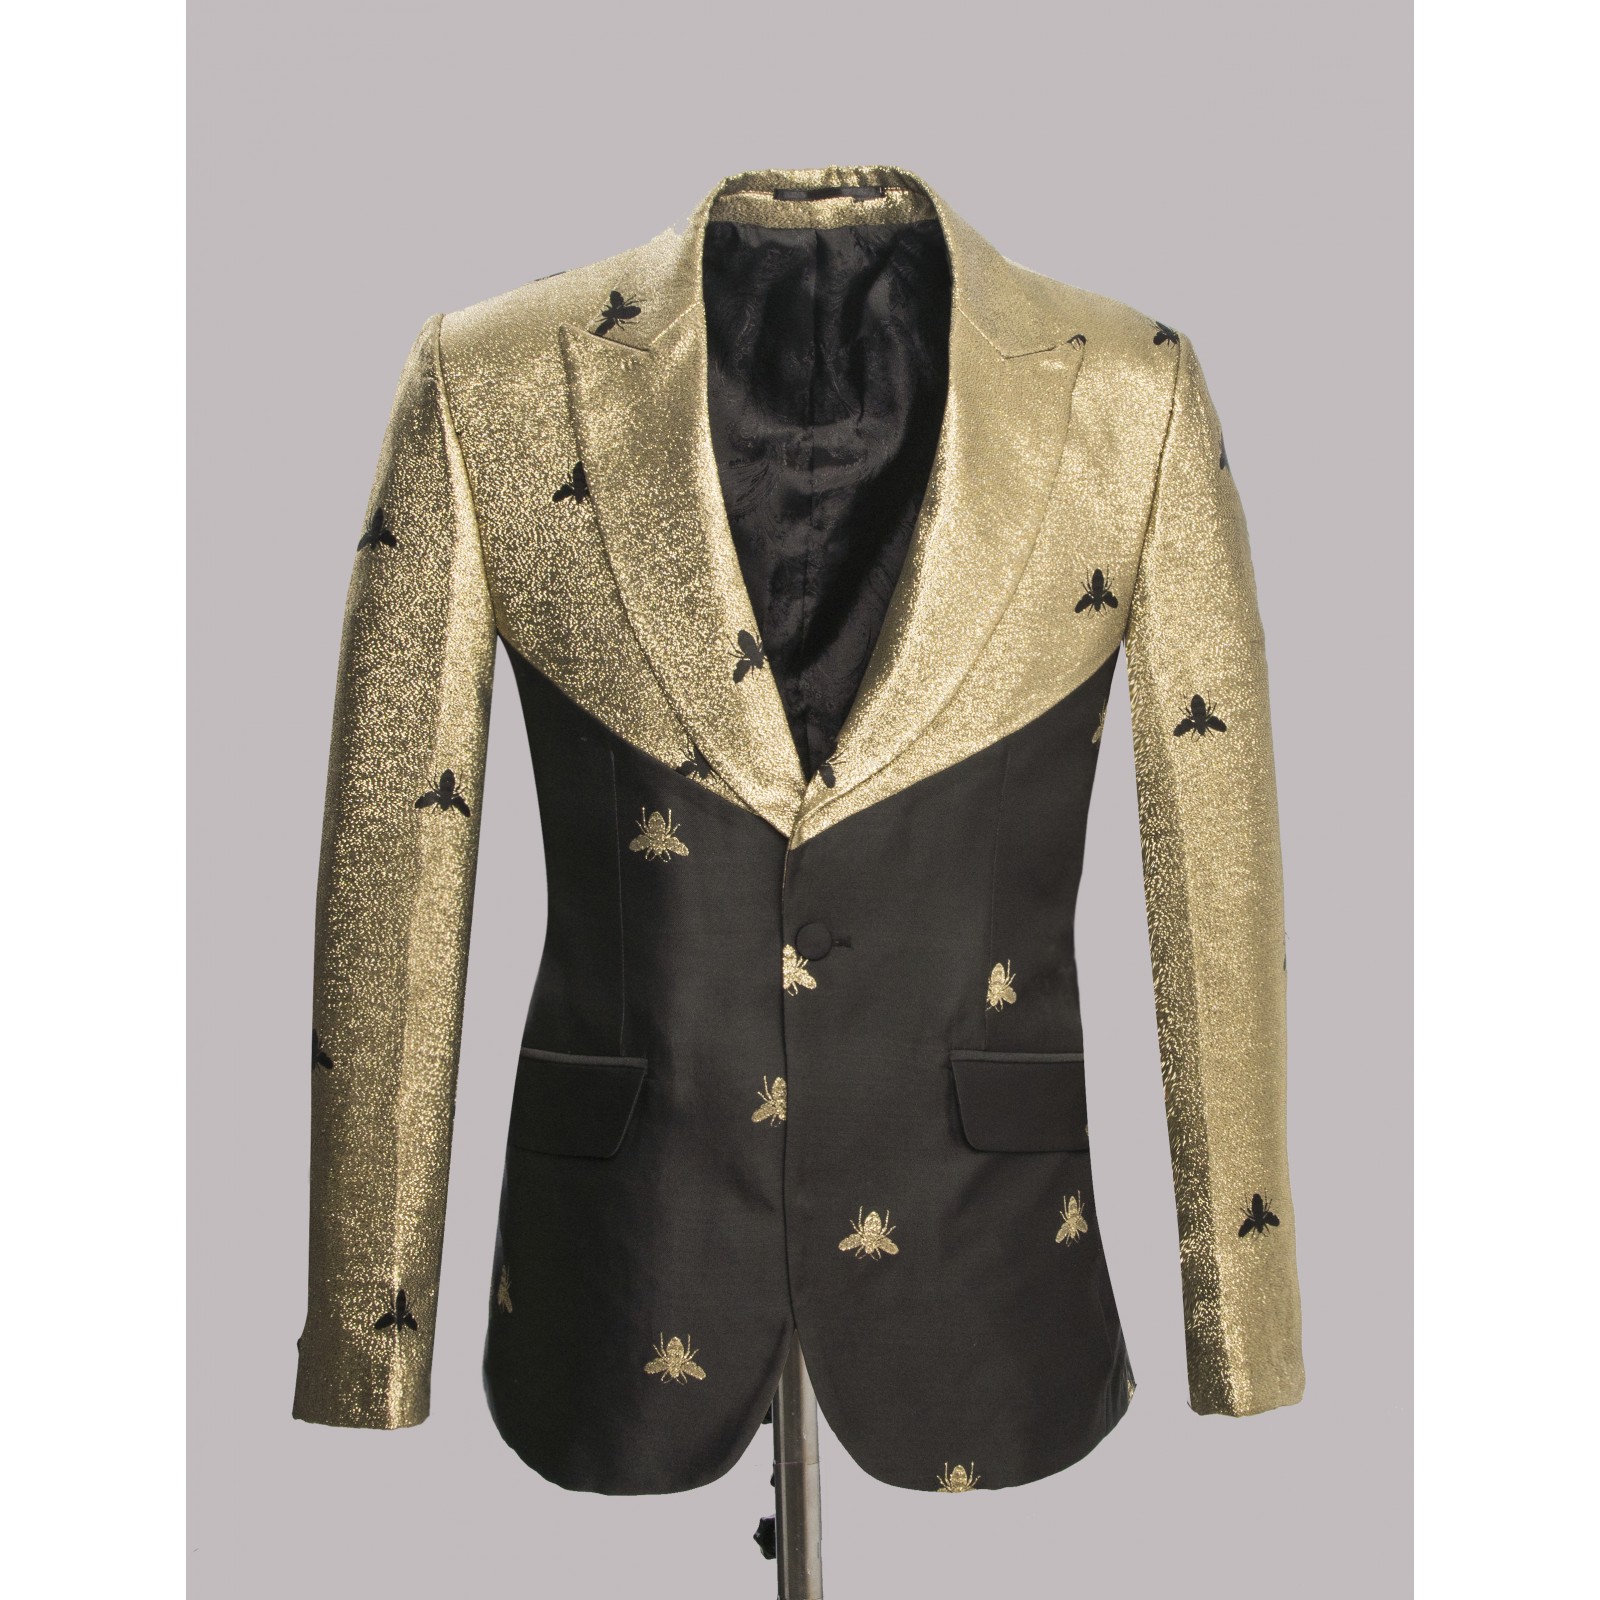 Gold Sparkled With Black Accent Tuxedo